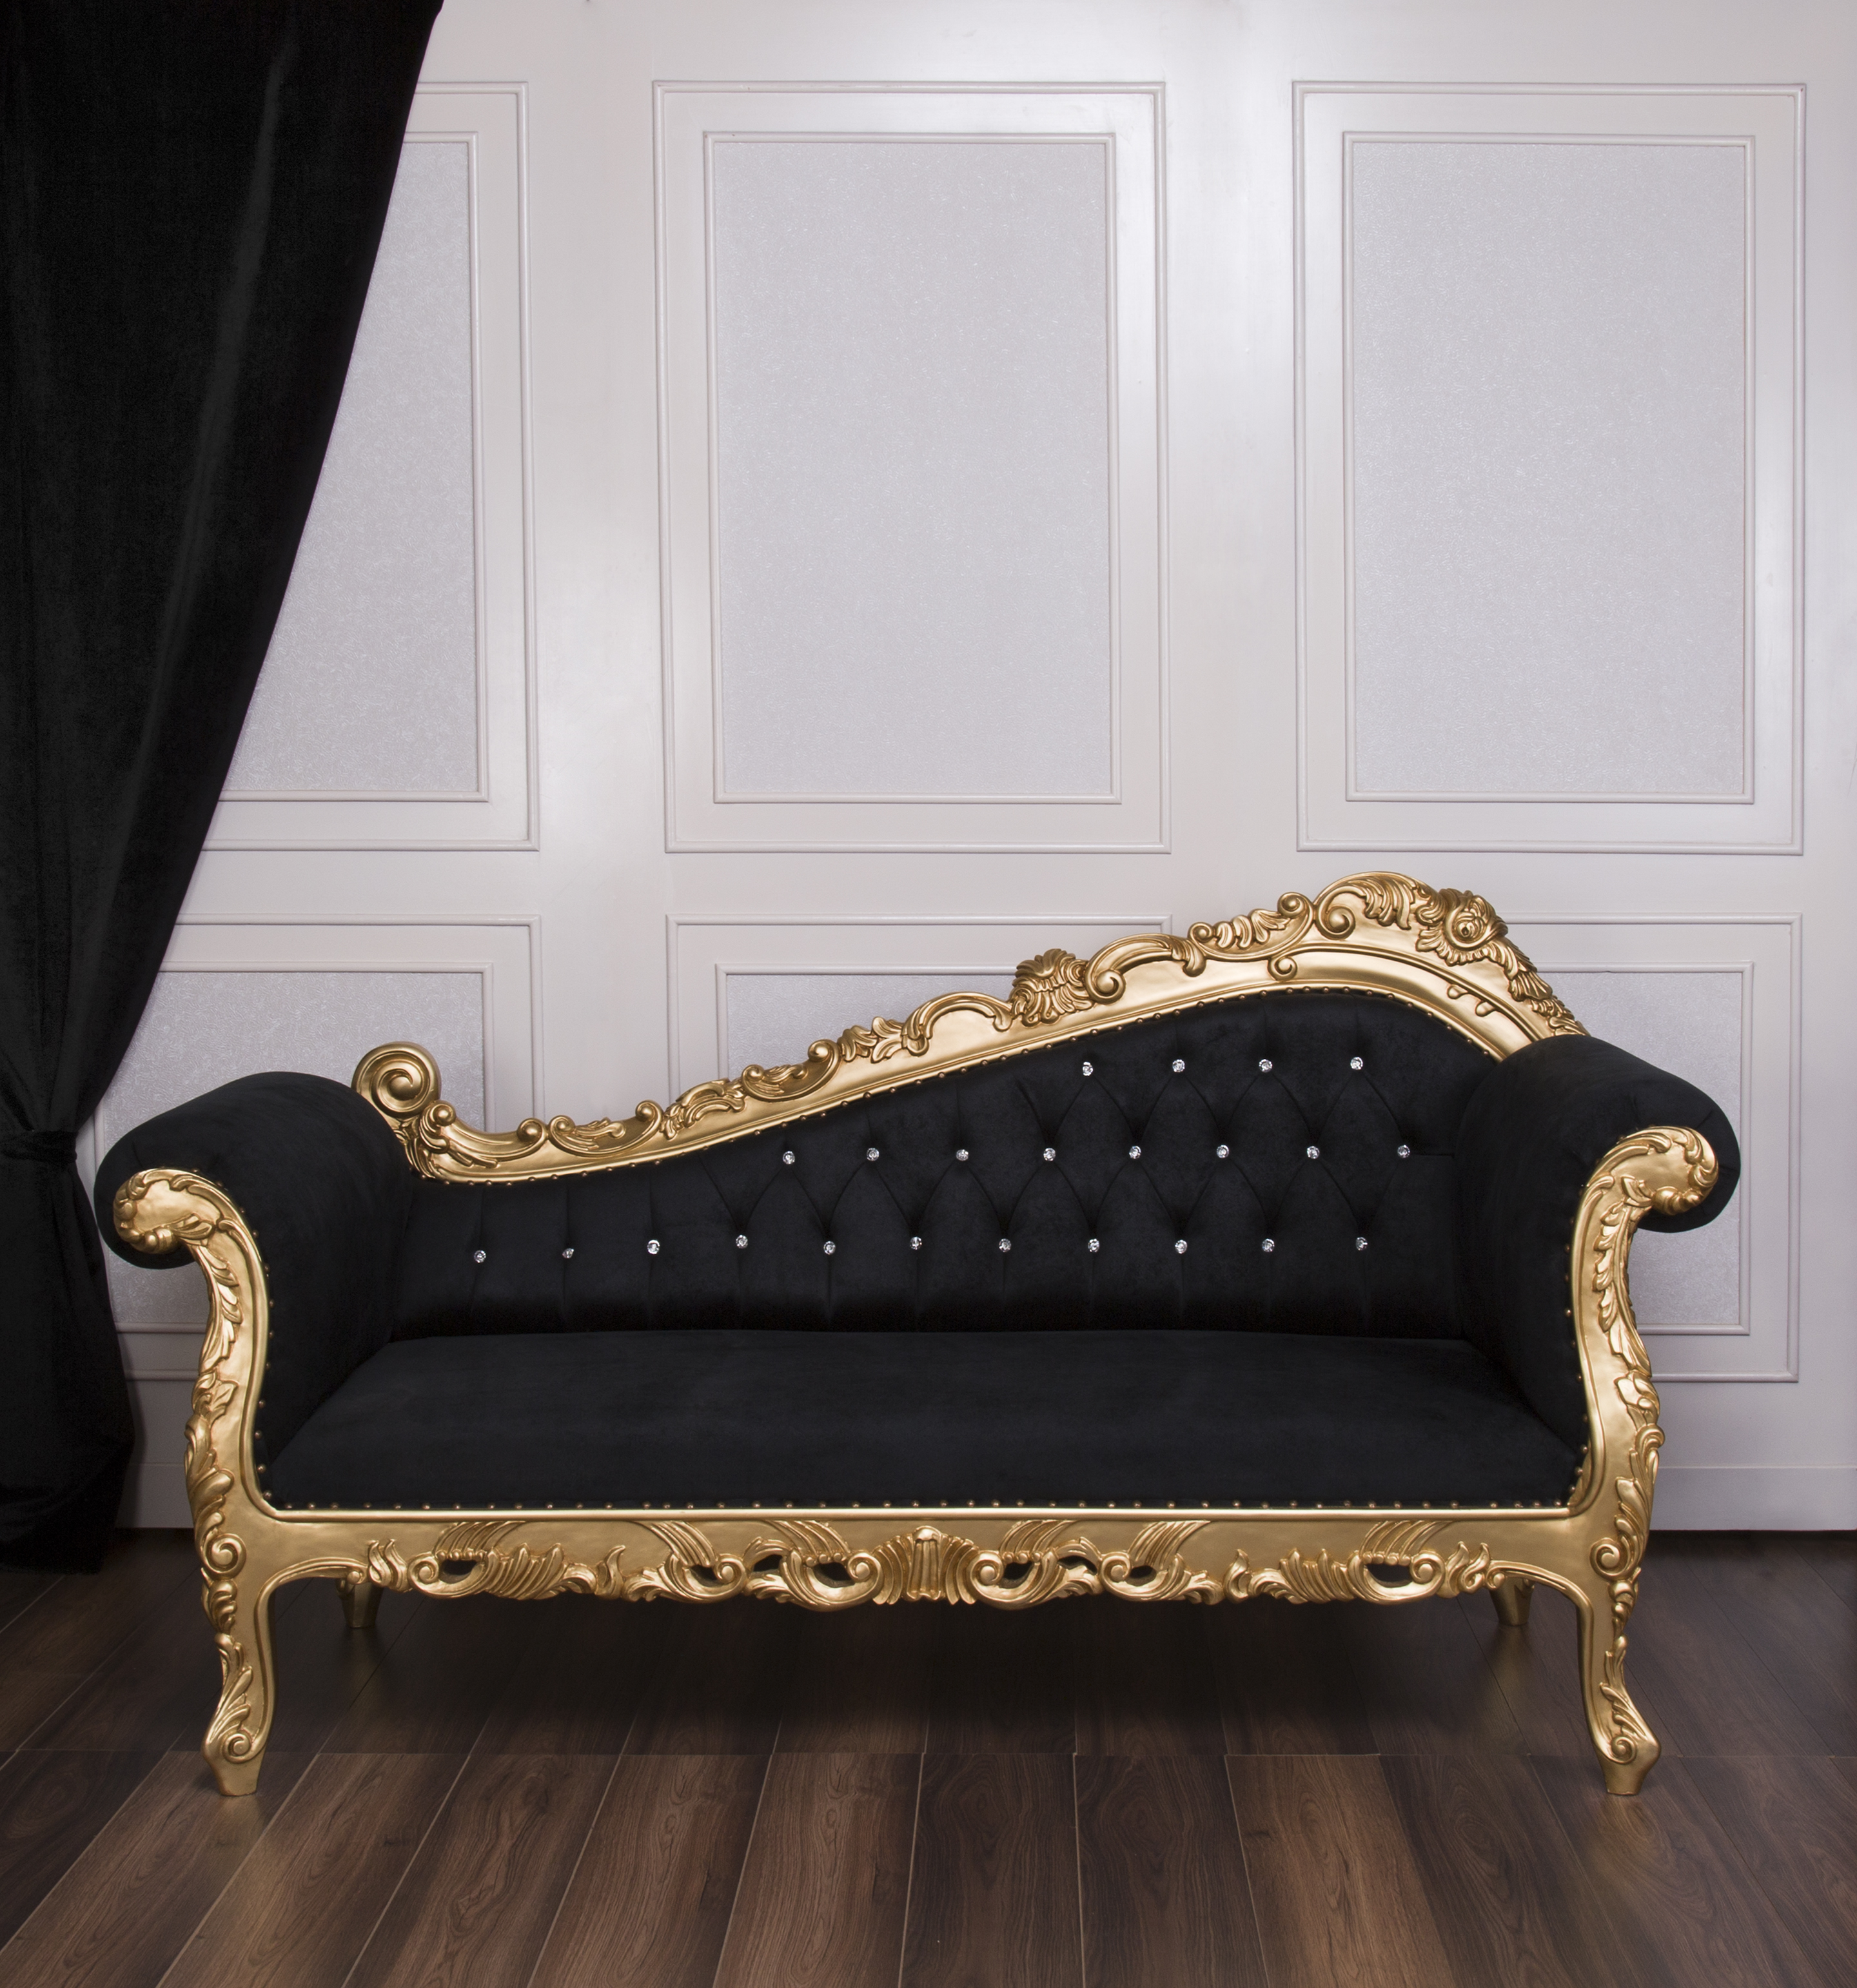 Gold & Black Suede Cleopatra Chaise Lounge